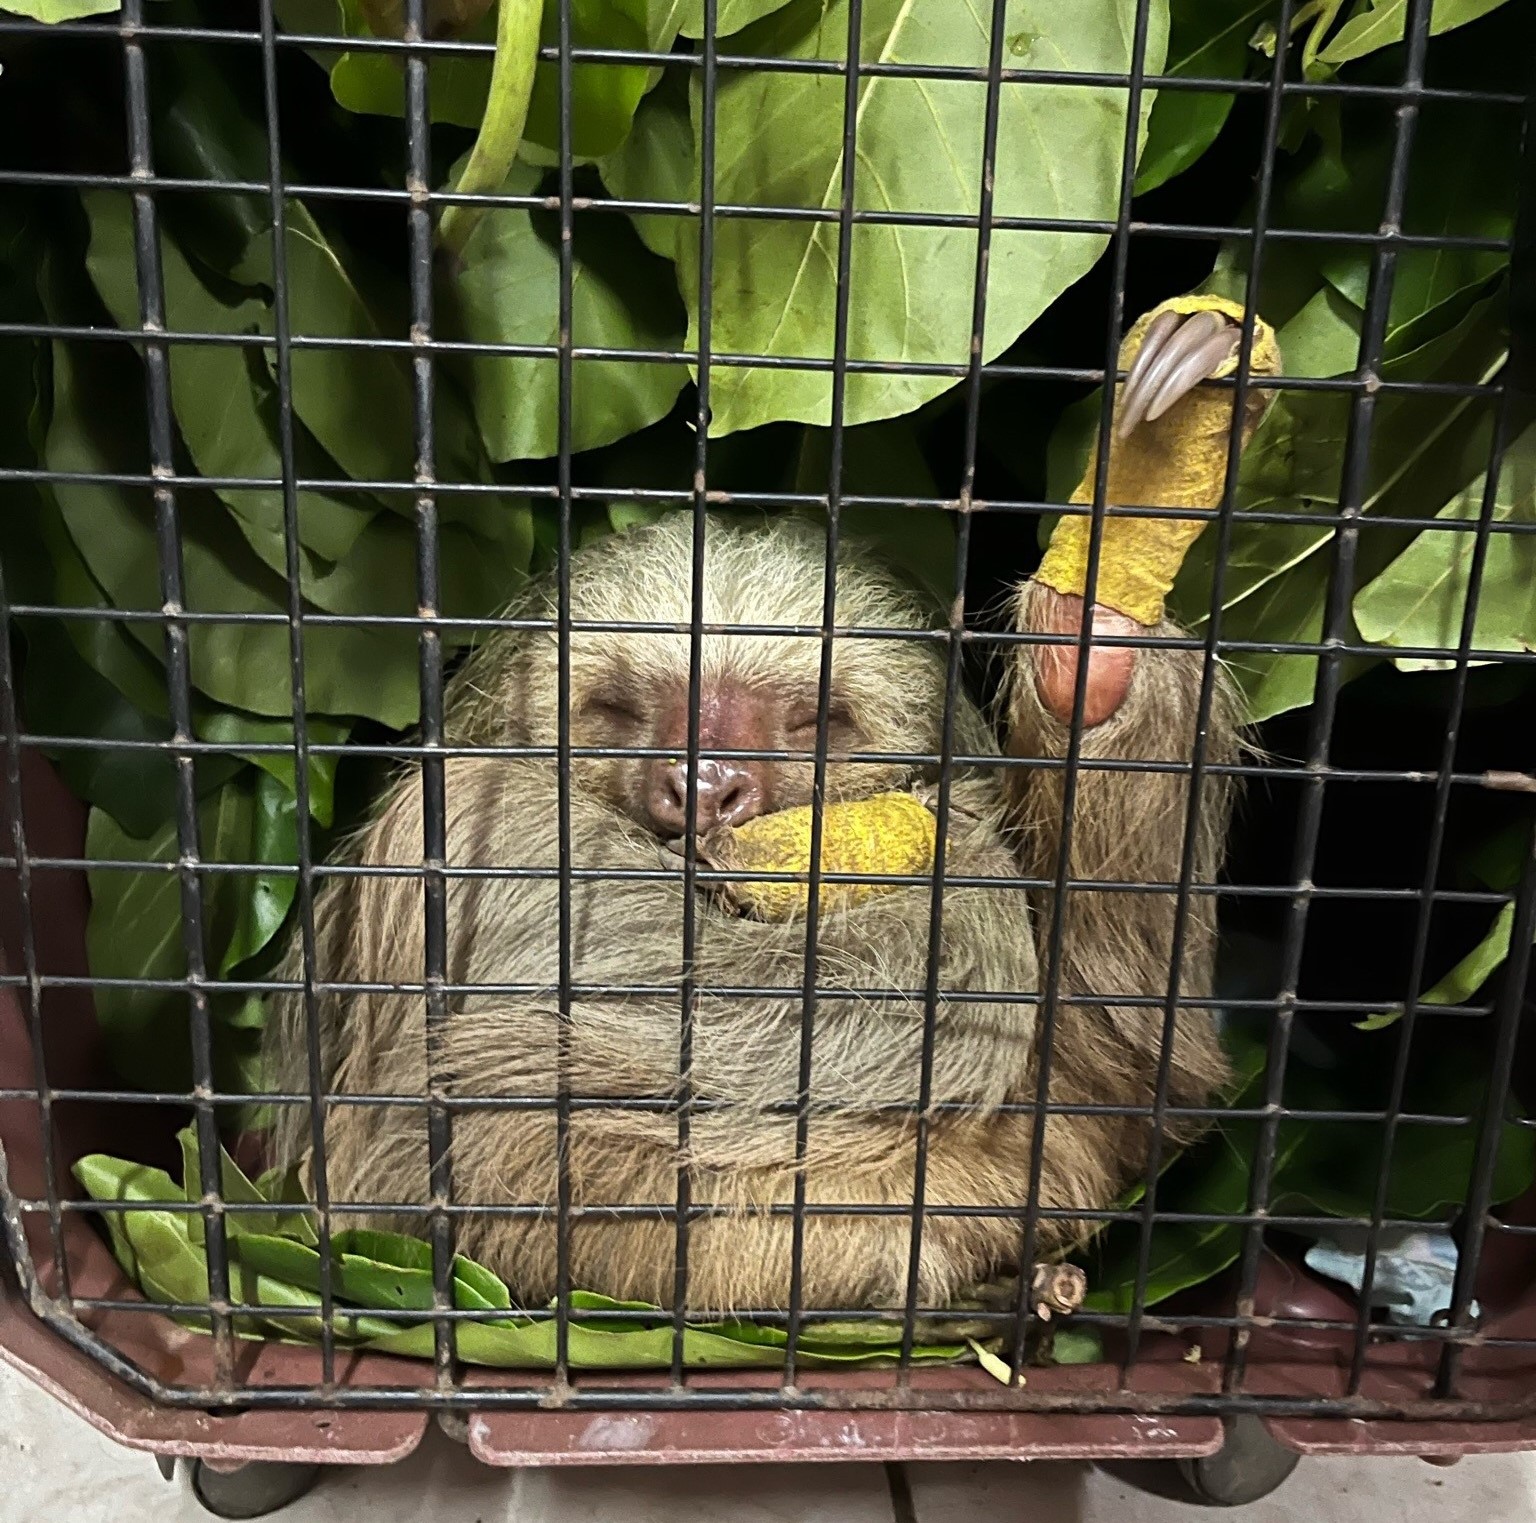 Costa Rica sloth shown with bandages and resting in cage